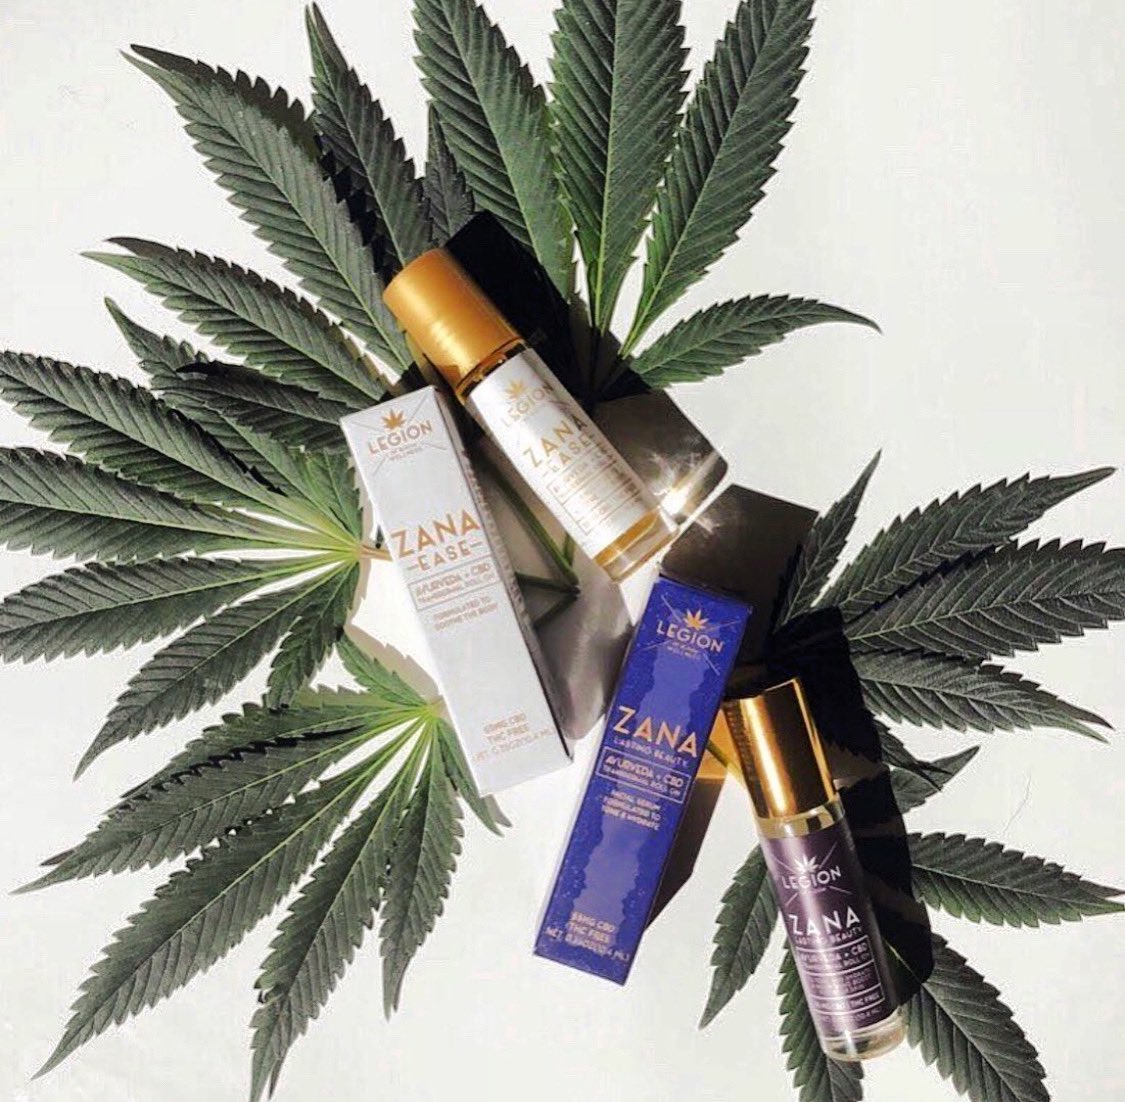 WHY CBD? CBD is well known for its ability to alleviate pain & calm the nervous system, eliminating stress in the mind & body. It is also an antioxidant, helping to protect the body from free radicals. 

#hempoil #hemp #sanskrit #zana #cbd #cbdoil #hempextract #antiageing